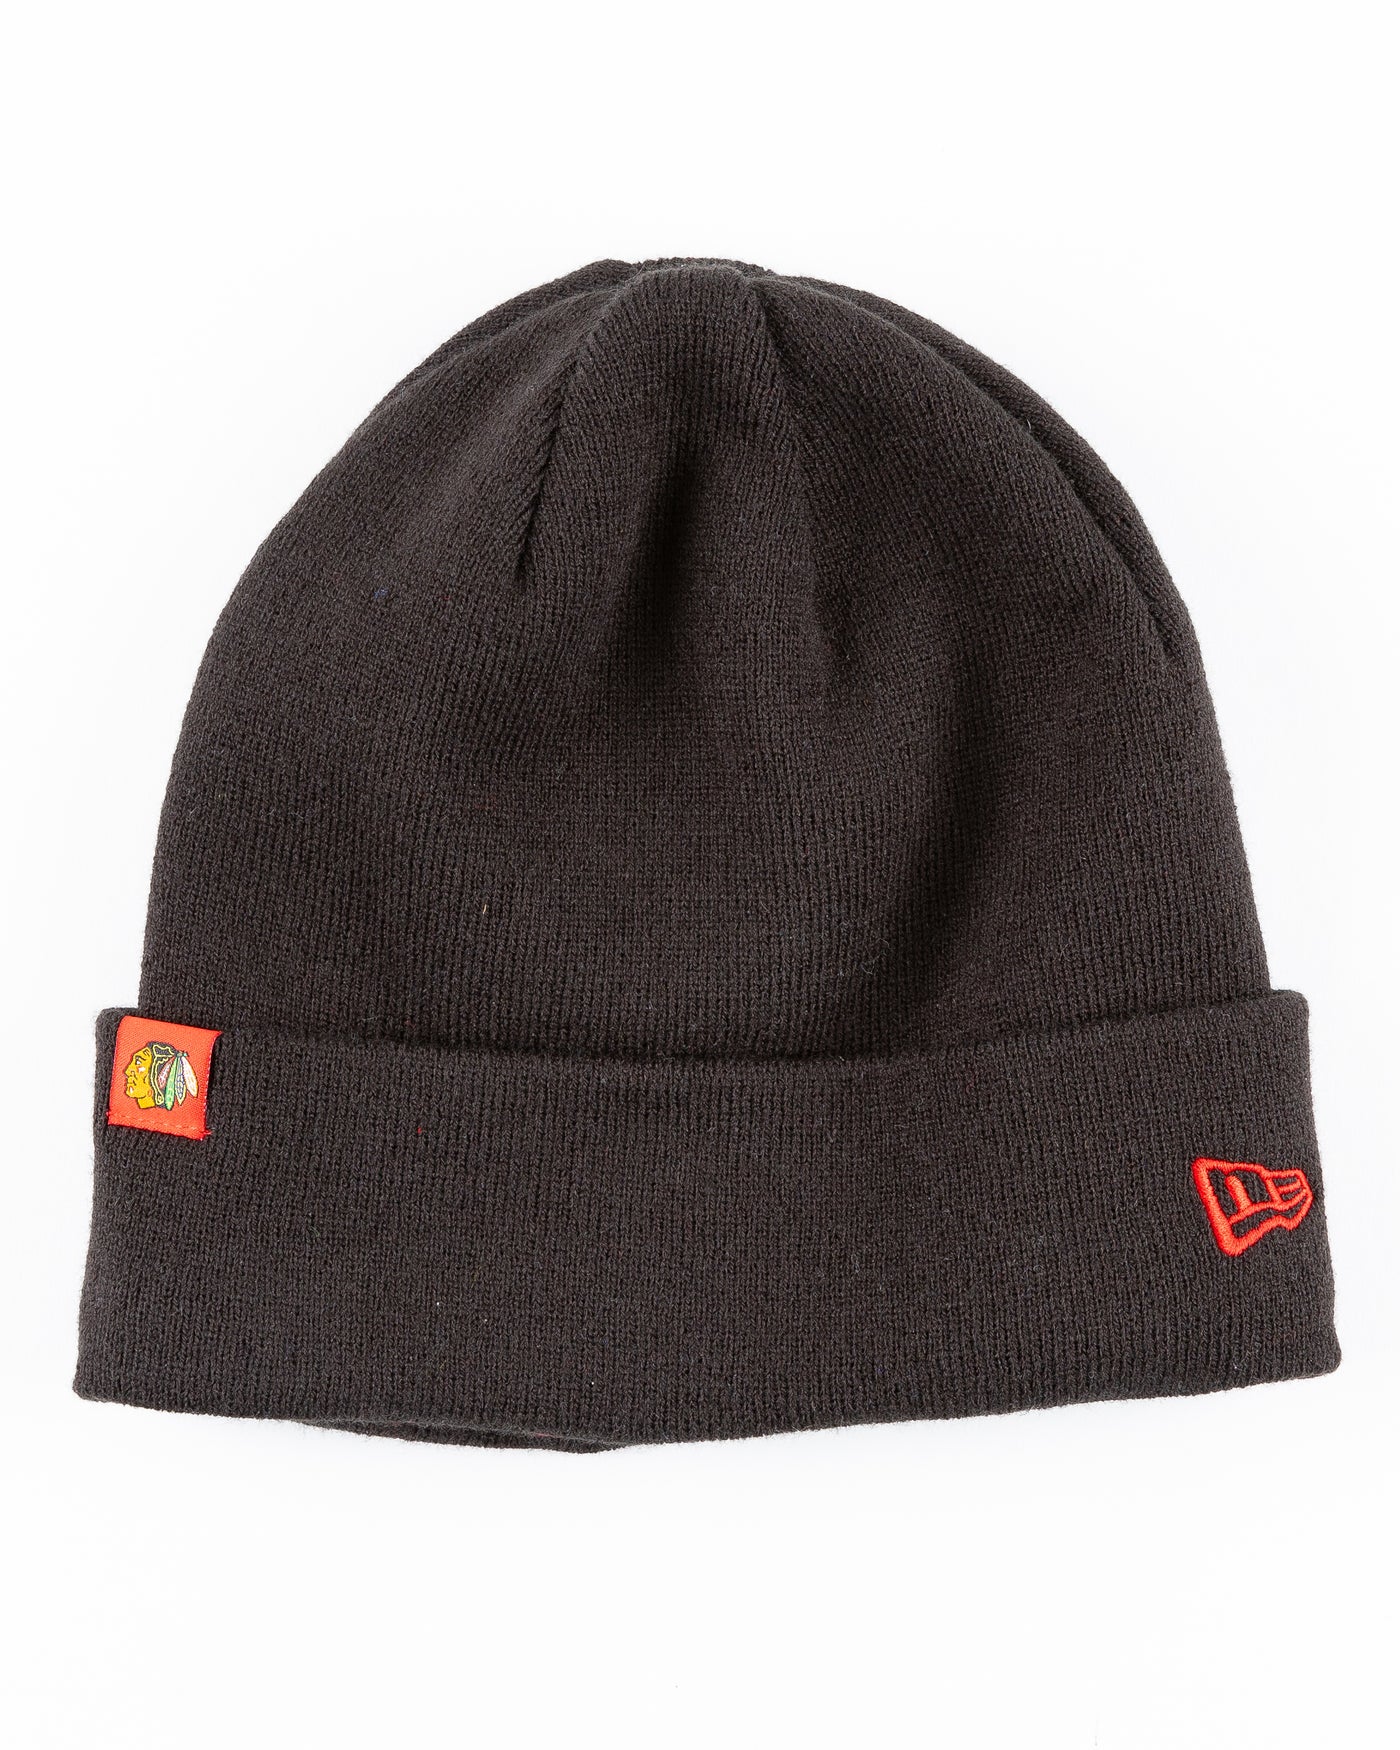 black New Era beanie lined with red satin with Chicago Blackhawks primary logo on tag on front cuff - front lay flat